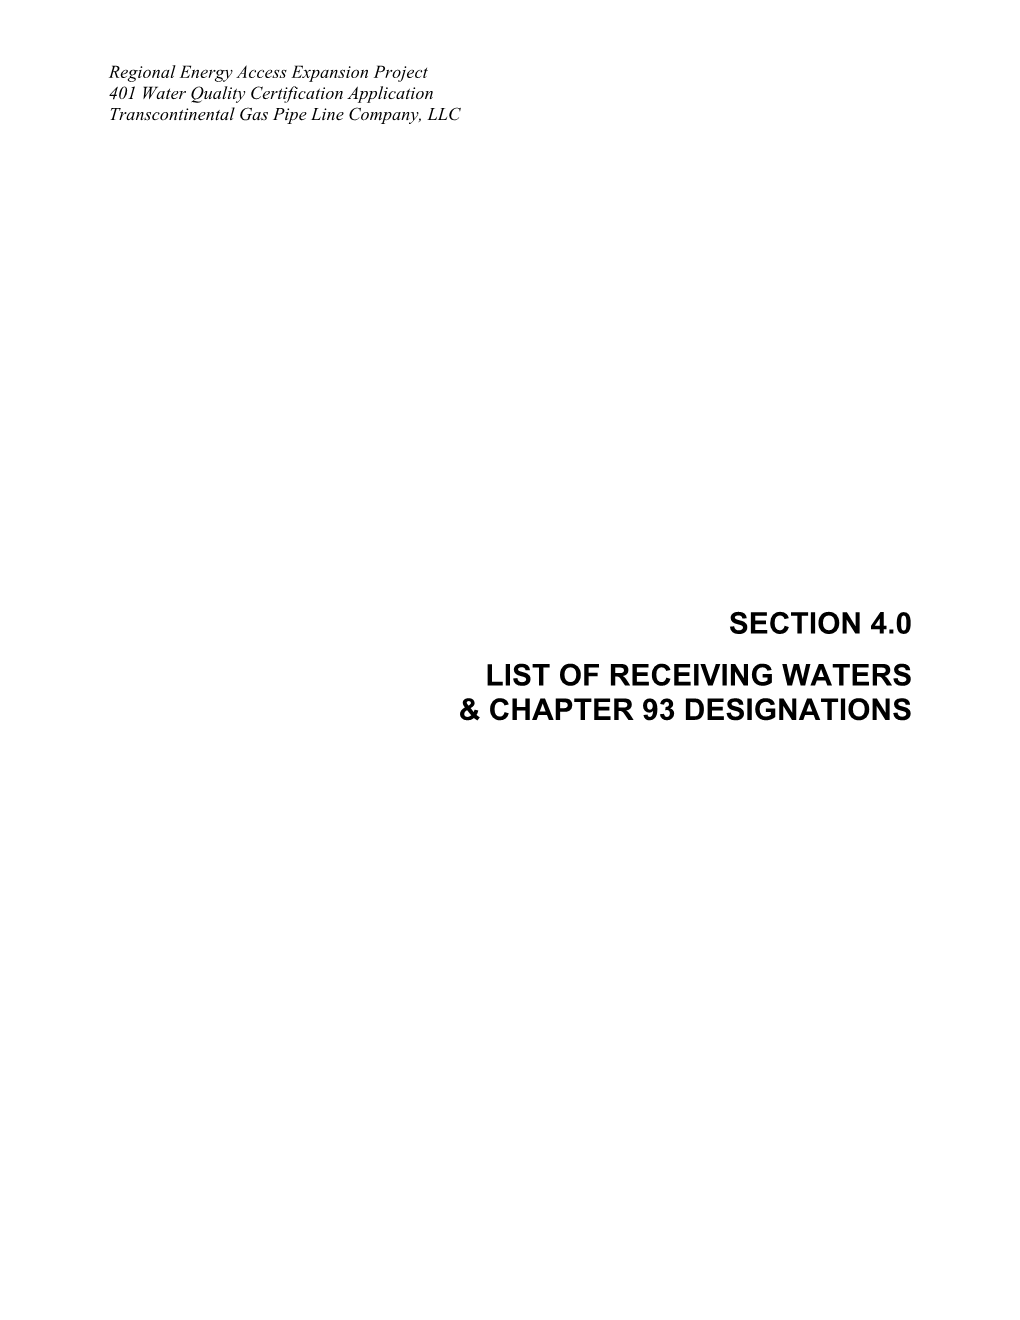 Section 4.0 List of Receiving Waters & Chapter 93 Designations